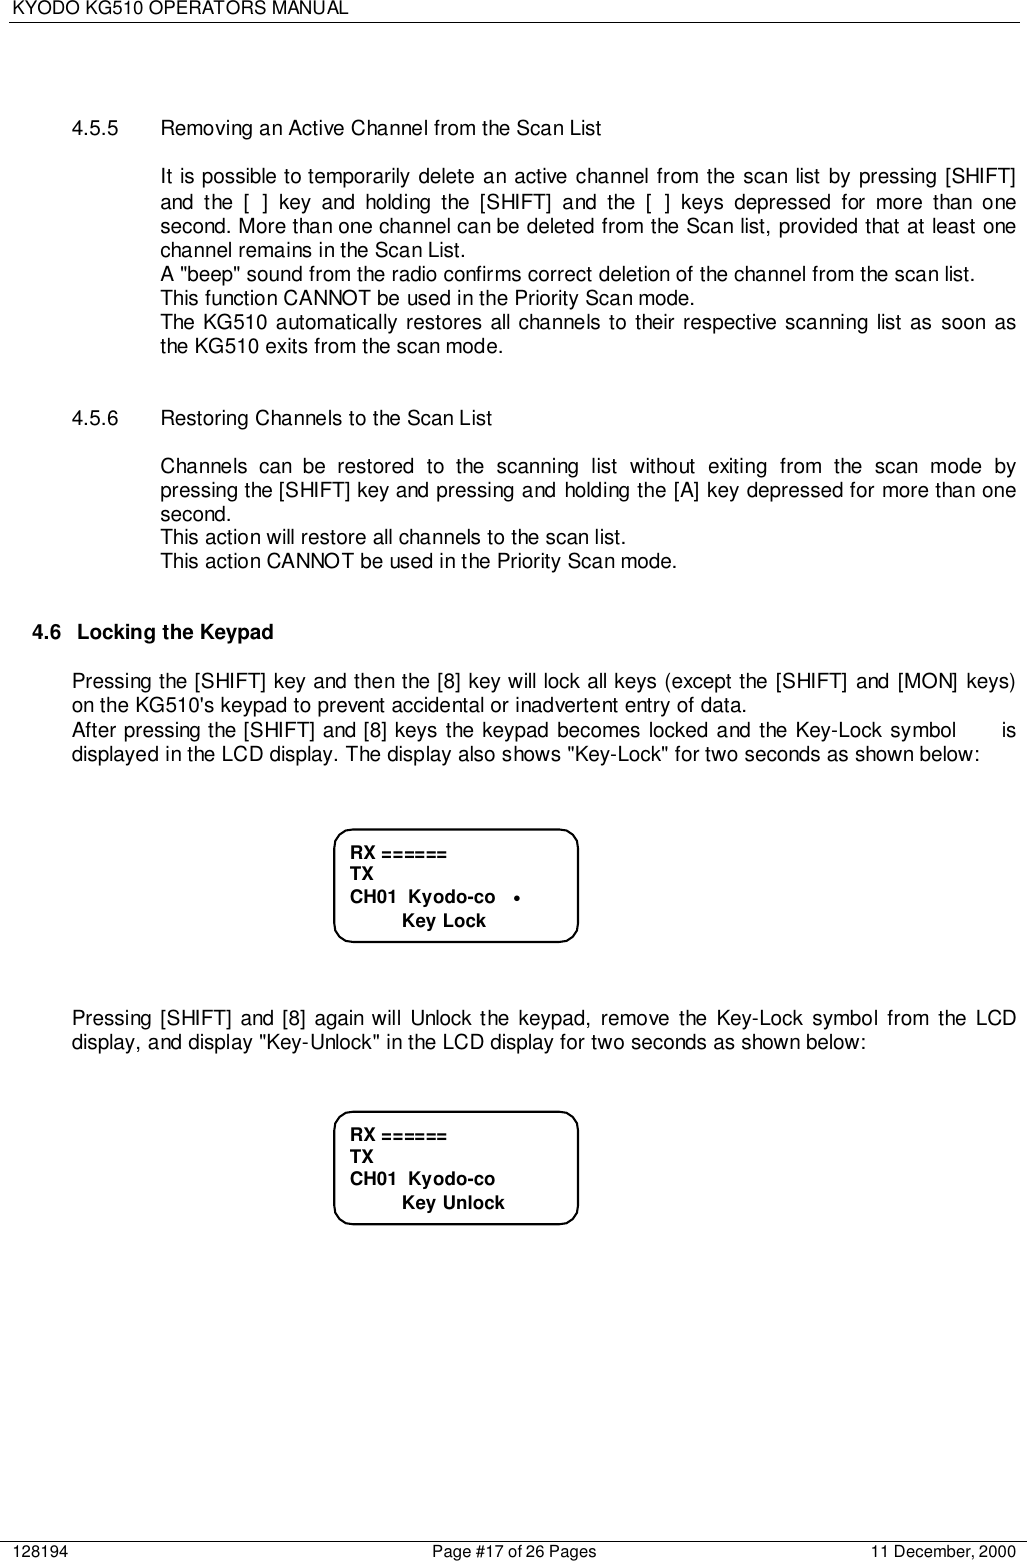 KYODO KG510 OPERATORS MANUAL128194 Page #17 of 26 Pages 11 December, 20004.5.5  Removing an Active Channel from the Scan ListIt is possible to temporarily delete an active channel from the scan list by pressing [SHIFT]and the [ ] key and holding the [SHIFT] and the [ ] keys depressed for more than onesecond. More than one channel can be deleted from the Scan list, provided that at least onechannel remains in the Scan List.A &quot;beep&quot; sound from the radio confirms correct deletion of the channel from the scan list.This function CANNOT be used in the Priority Scan mode.The KG510 automatically restores all channels to their respective scanning list as soon asthe KG510 exits from the scan mode.4.5.6  Restoring Channels to the Scan ListChannels can be restored to the scanning list without exiting from the scan mode bypressing the [SHIFT] key and pressing and holding the [A] key depressed for more than onesecond.This action will restore all channels to the scan list.This action CANNOT be used in the Priority Scan mode.4.6  Locking the KeypadPressing the [SHIFT] key and then the [8] key will lock all keys (except the [SHIFT] and [MON] keys)on the KG510&apos;s keypad to prevent accidental or inadvertent entry of data.After pressing the [SHIFT] and [8] keys the keypad becomes locked and the Key-Lock symbol     isdisplayed in the LCD display. The display also shows &quot;Key-Lock&quot; for two seconds as shown below:Pressing [SHIFT] and [8] again will Unlock the keypad, remove the Key-Lock symbol from the LCDdisplay, and display &quot;Key-Unlock&quot; in the LCD display for two seconds as shown below:RX ======TXCH01  Kyodo-co          Key UnlockRX ======TXCH01  Kyodo-co   •          Key Lock